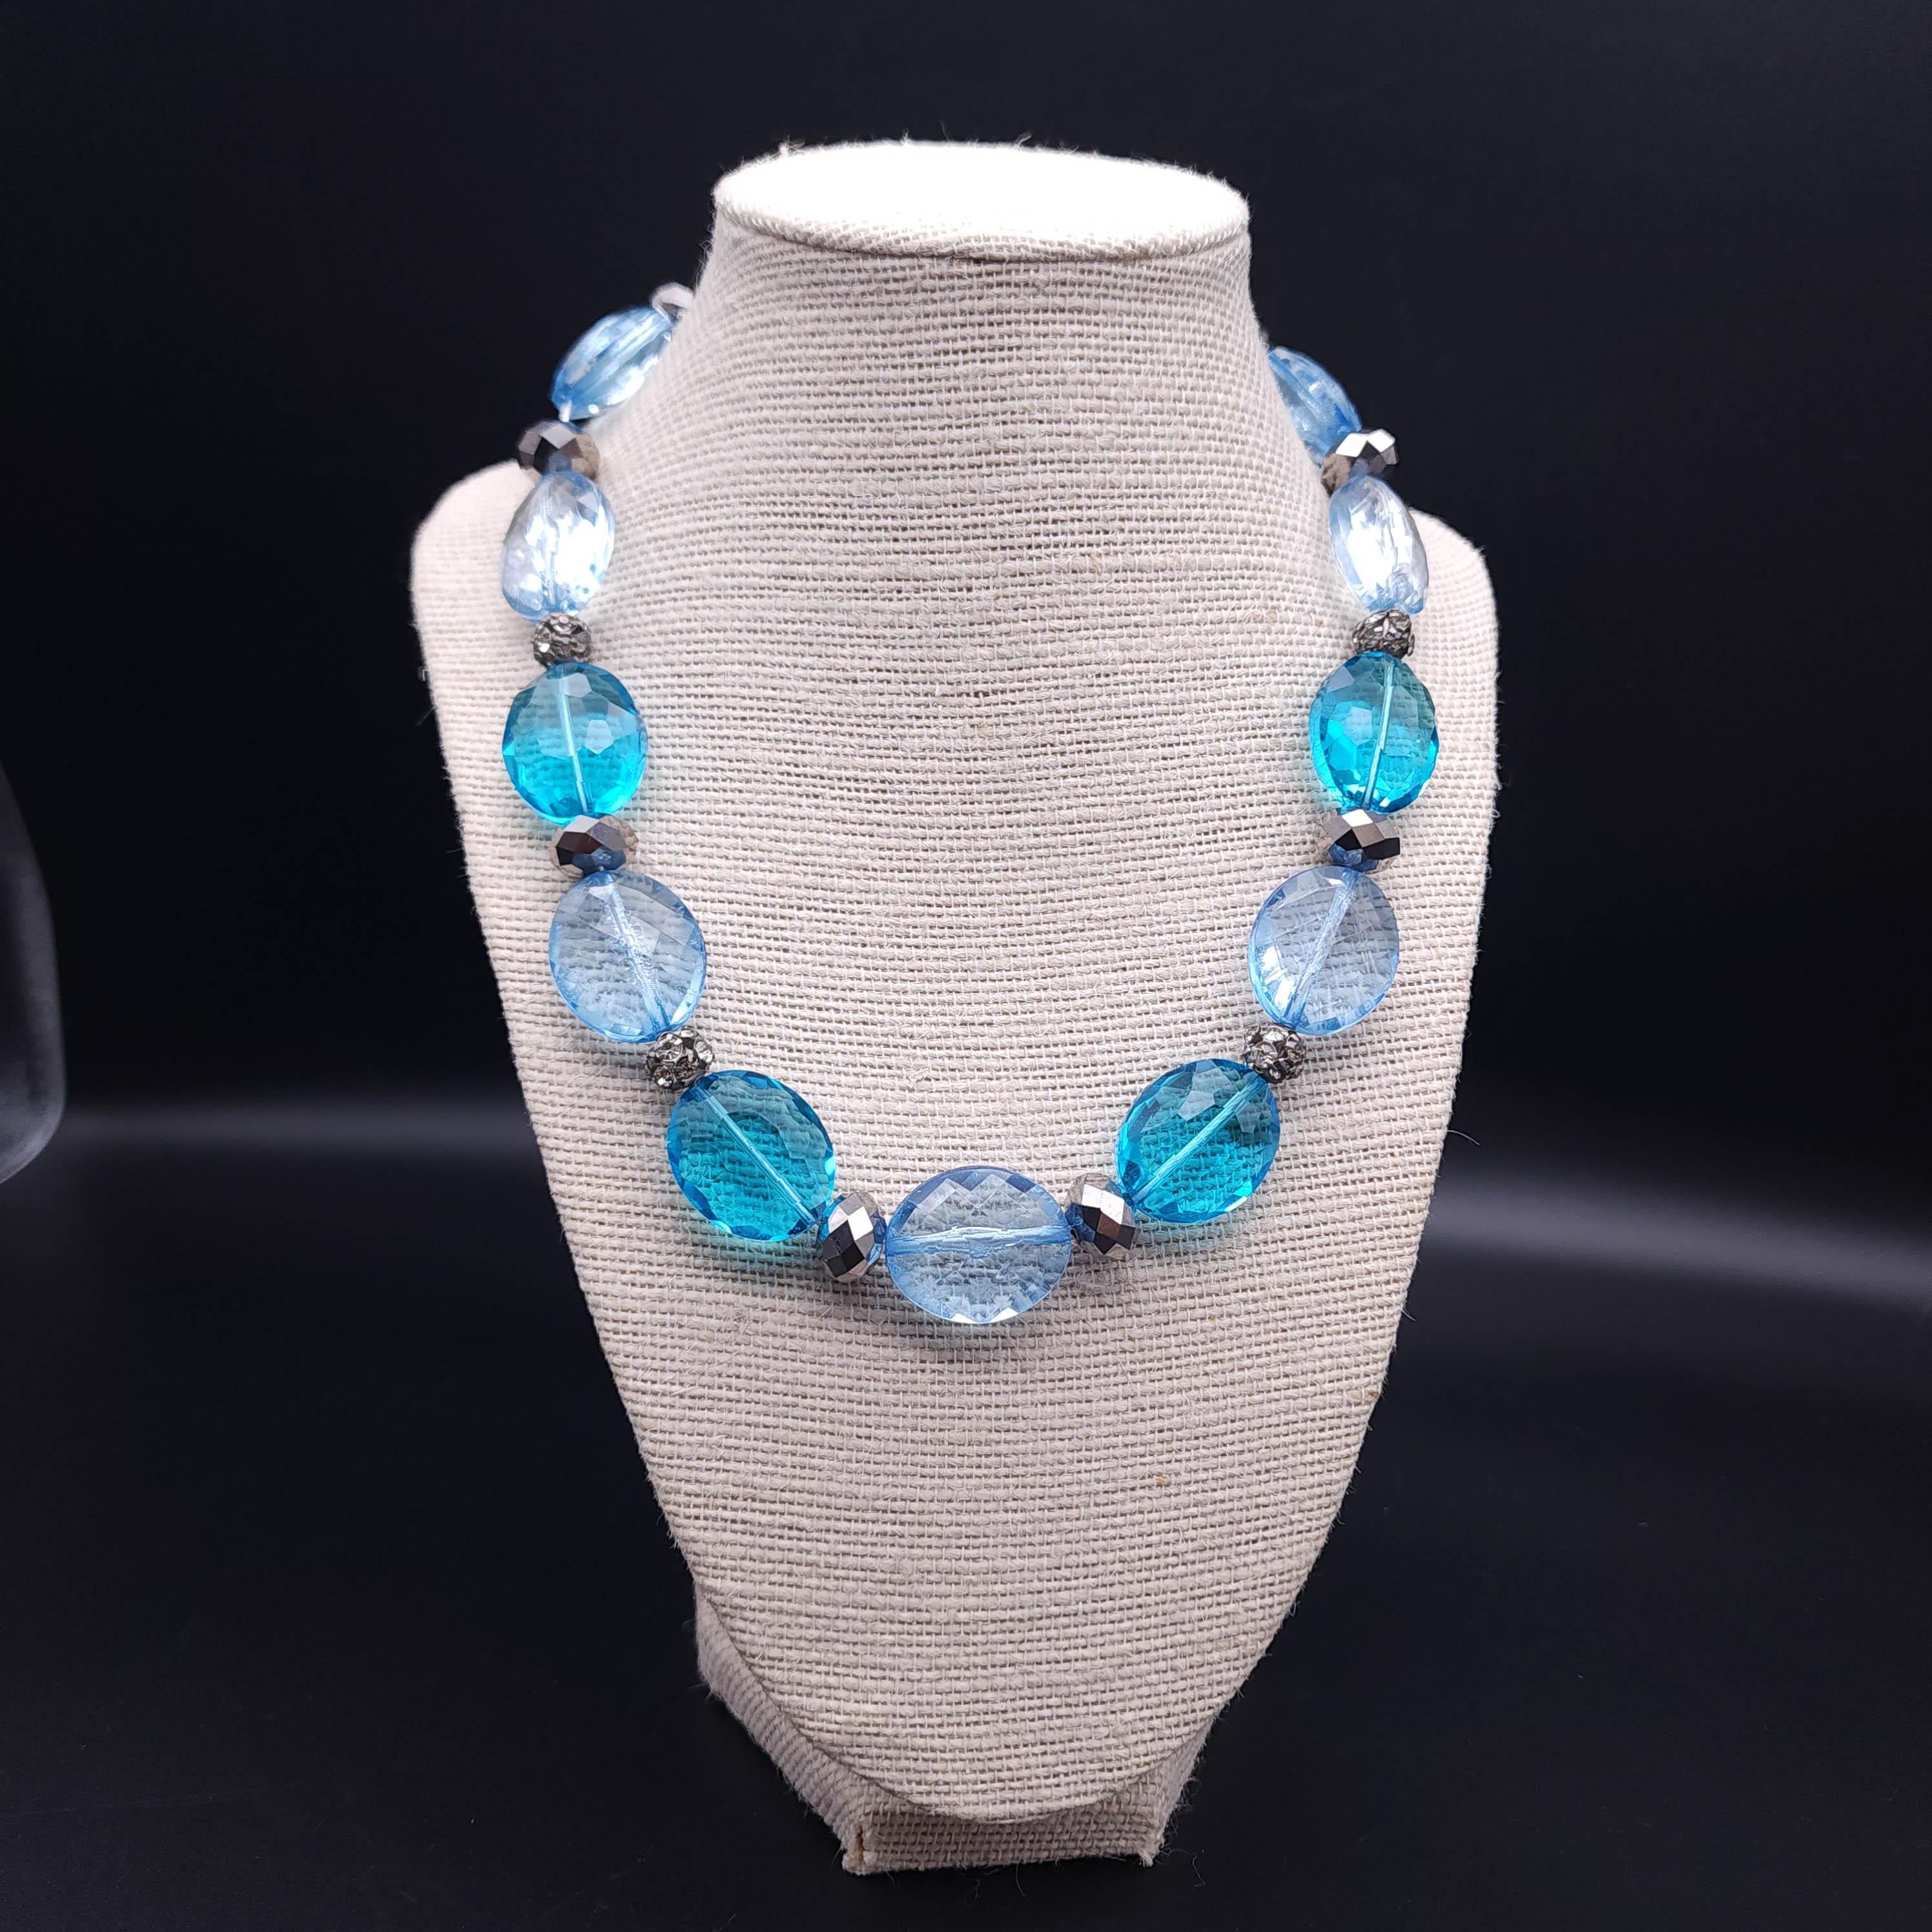 Discover the elegance of the past with the vintage Trifari Crown necklace, a timeless piece that exudes classic charm. This exquisite necklace features 1-inch faceted light-sapphire and aquamarine crystals, interspersed with pave crystal balls and